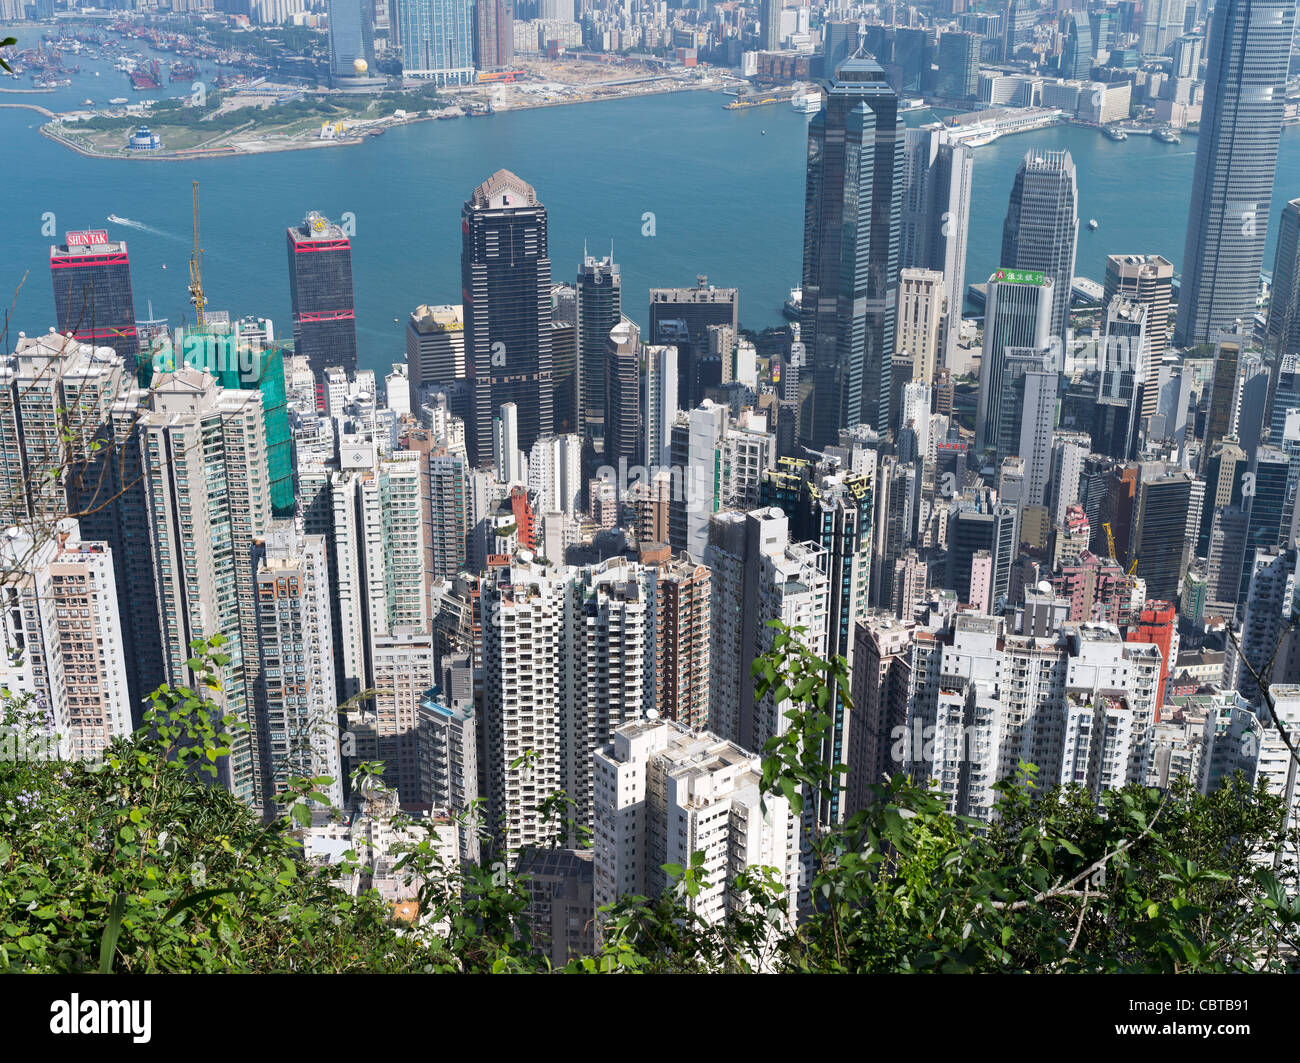 dh Victoria Peak view SHEUNG WAN HONG KONG Skyscraper residential flats office block towers harbour skyscrapers china city tower blocks Stock Photo